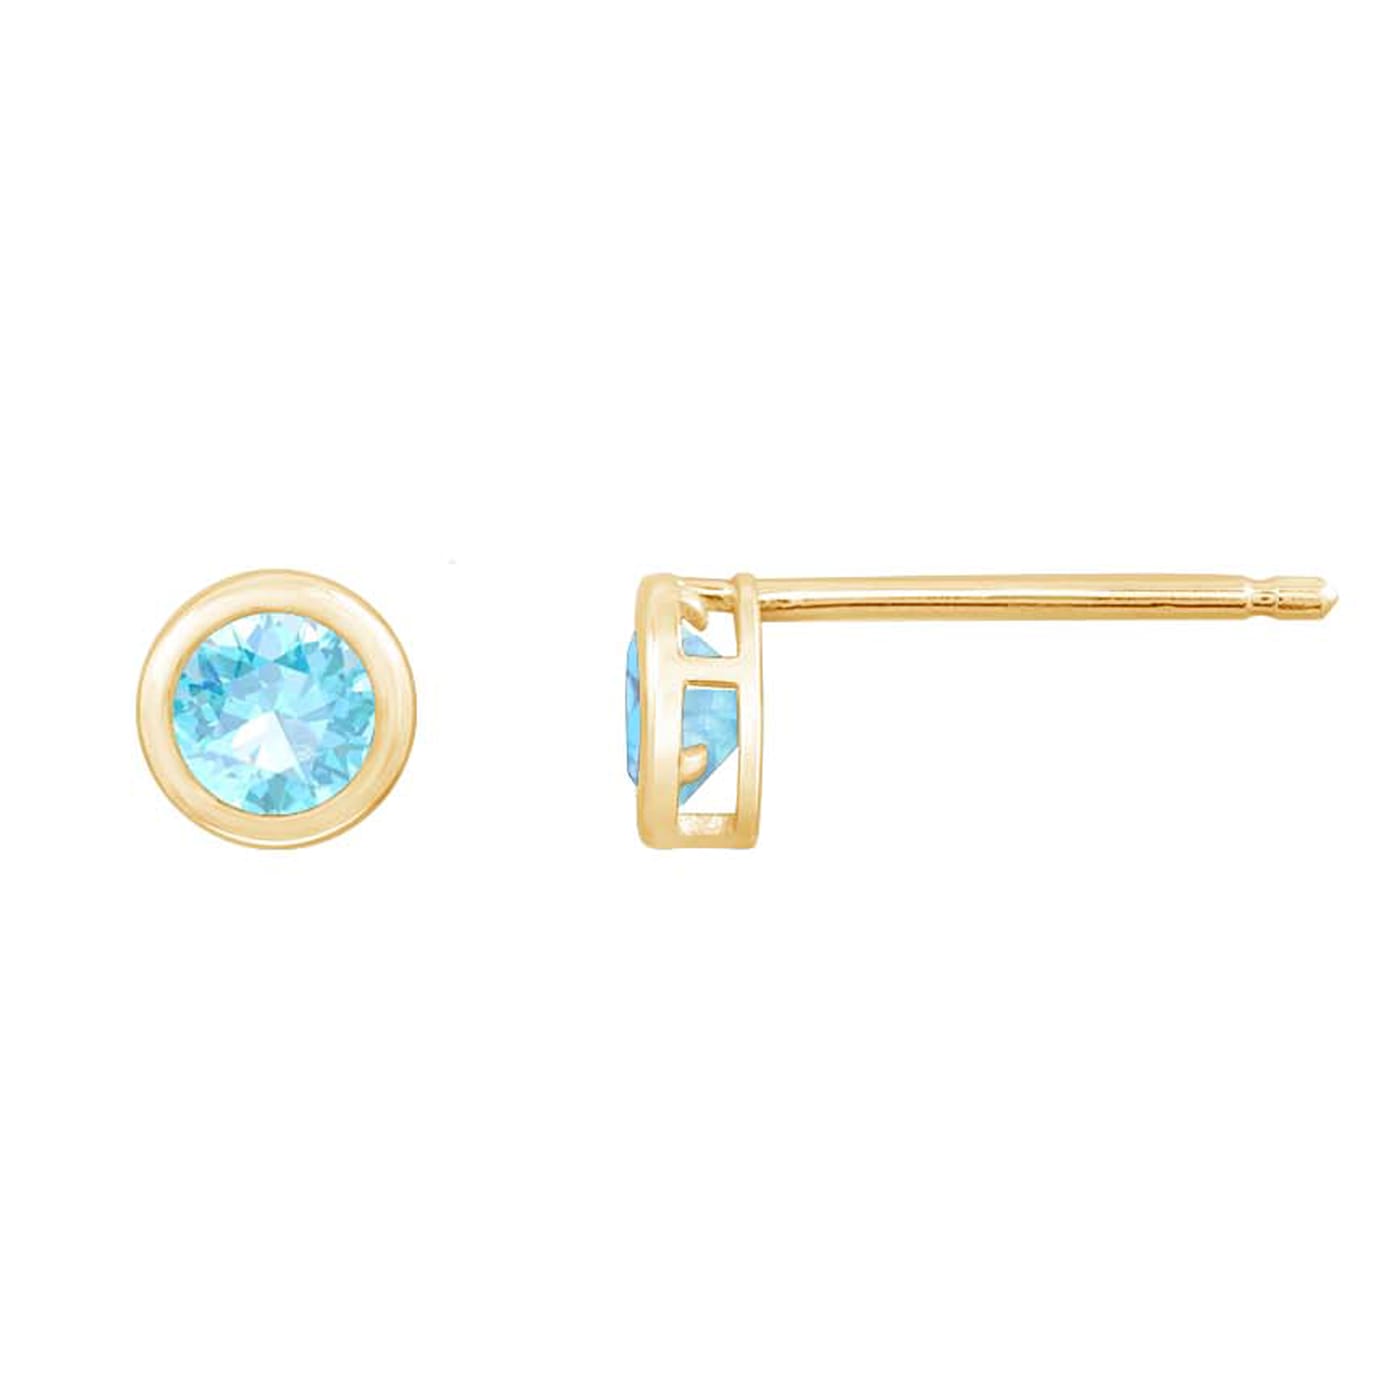 LUXGEM 10K Yellow Gold Solitaire March Birthstone Earrings | 0.25 